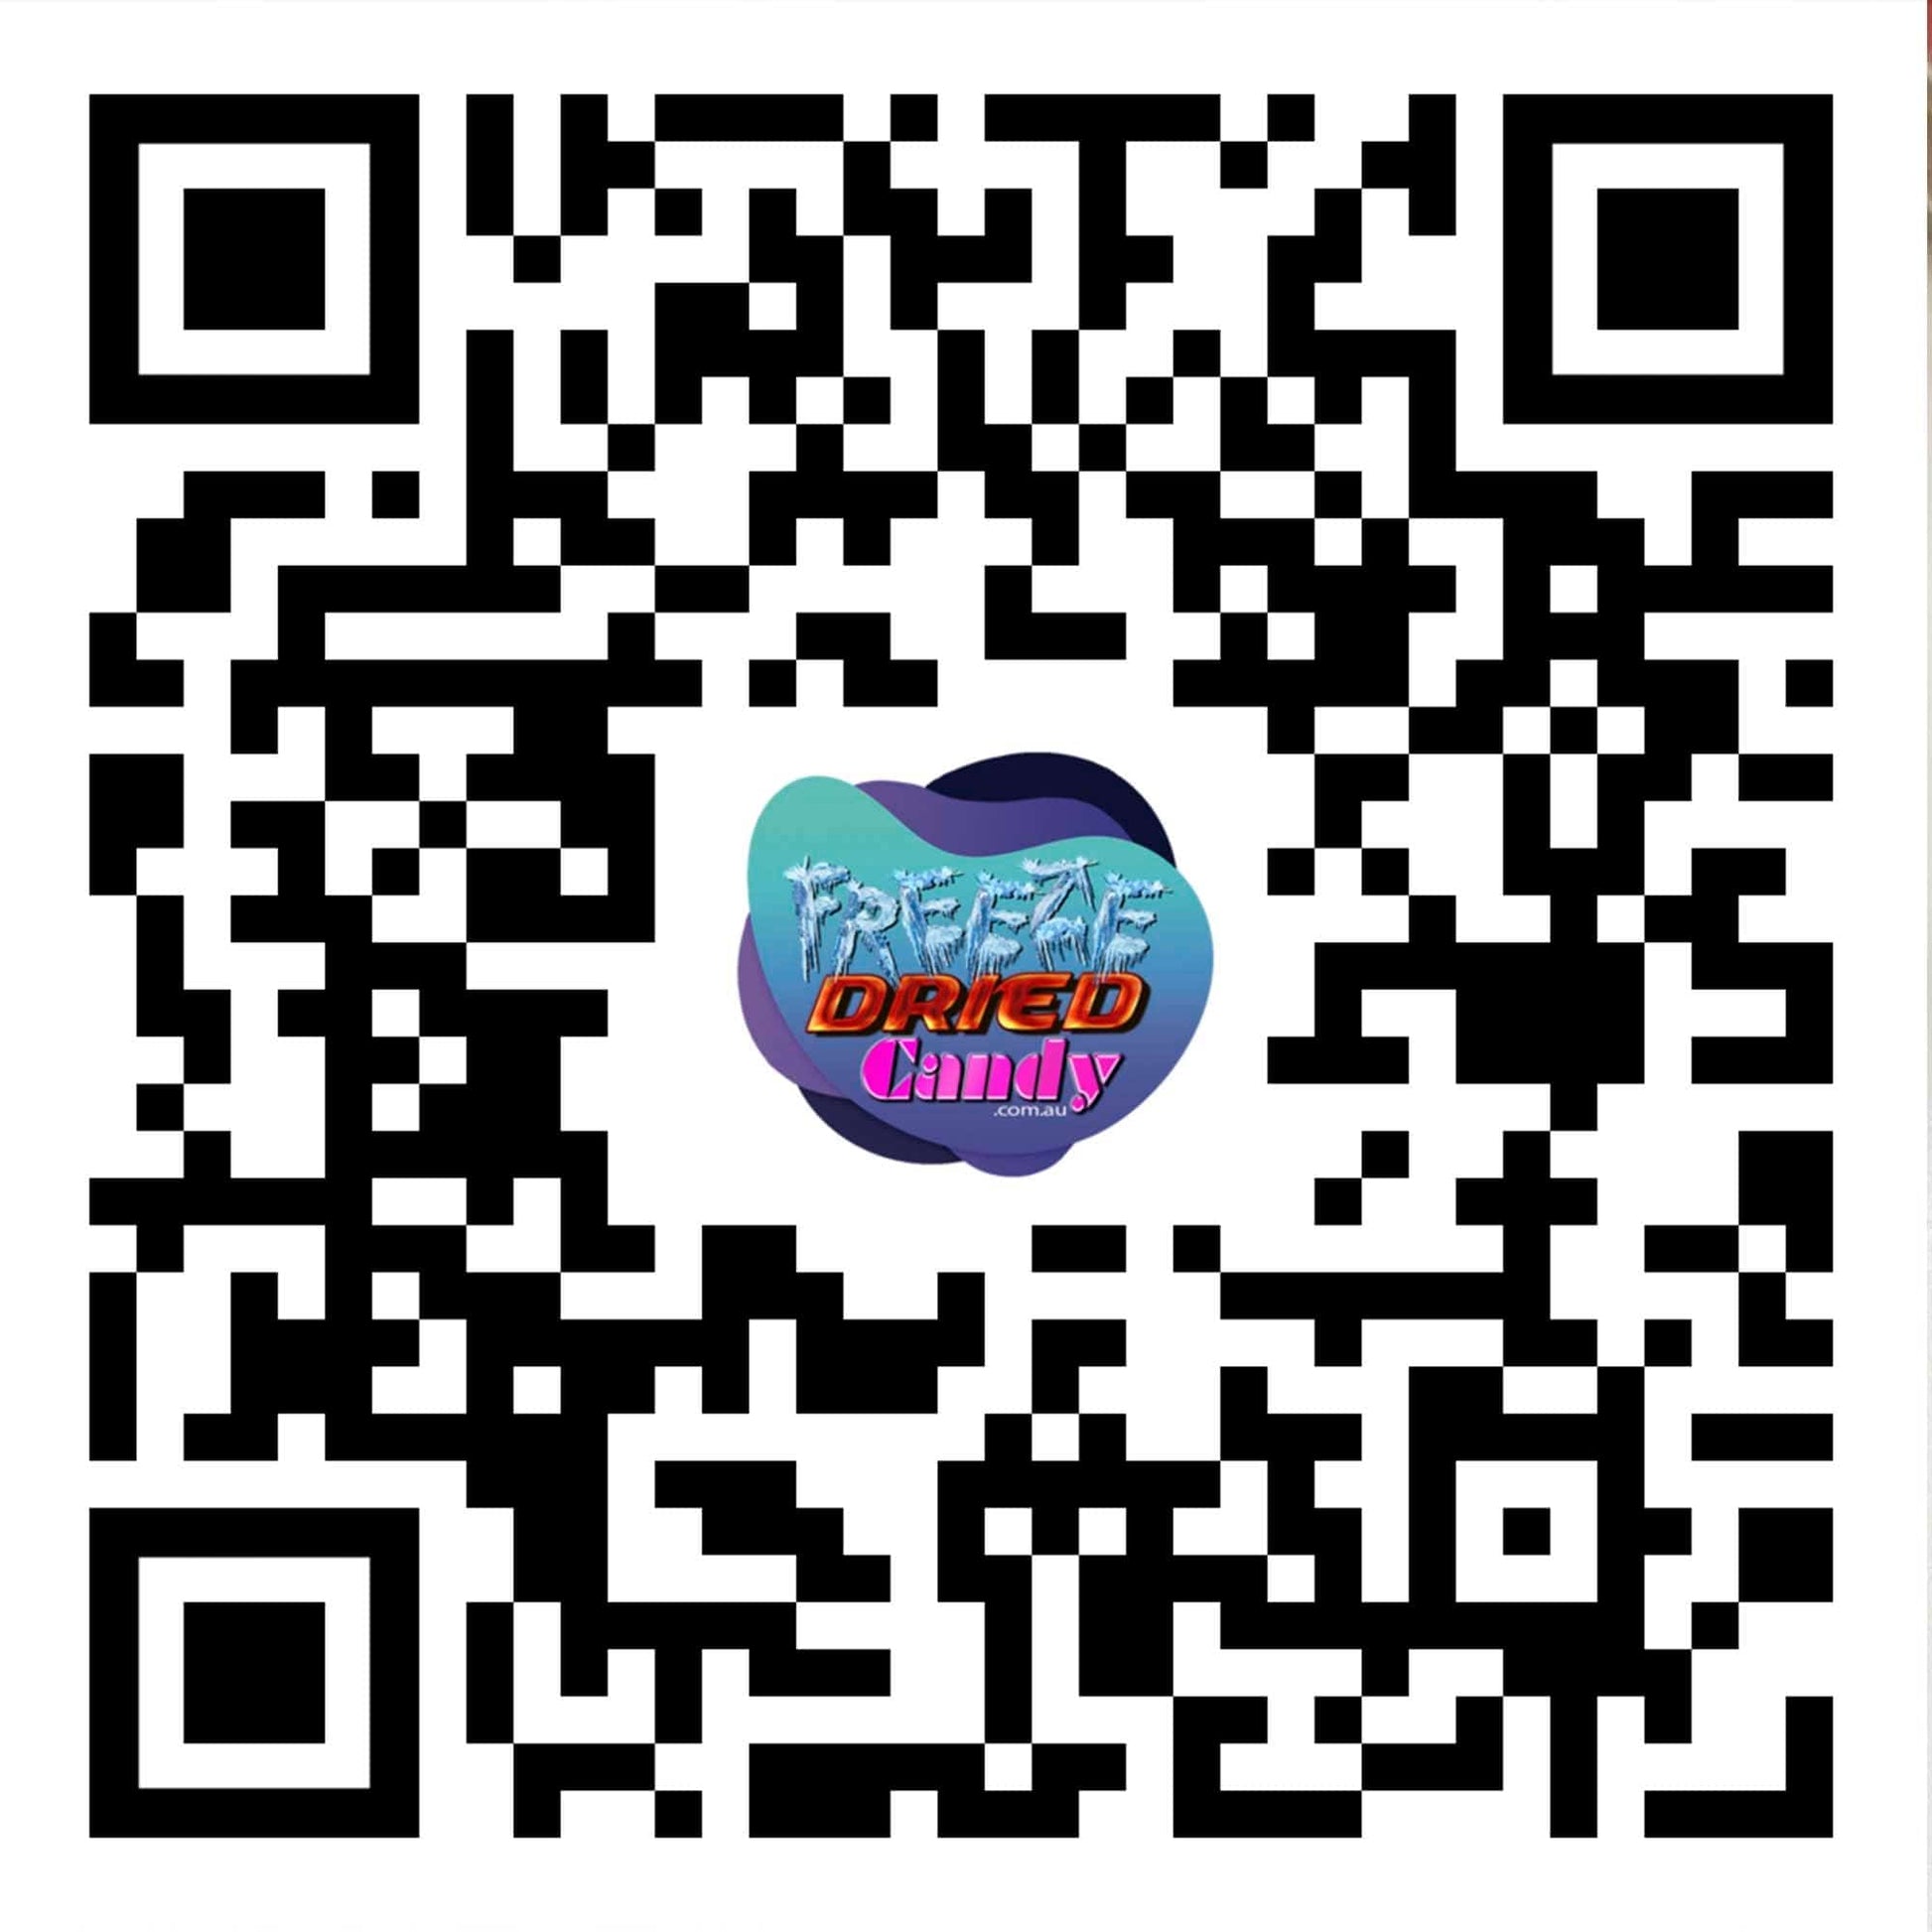 QR Code Find Us on the internet, Freeze Dried Candy Lollies Sweets Ice cream and treats